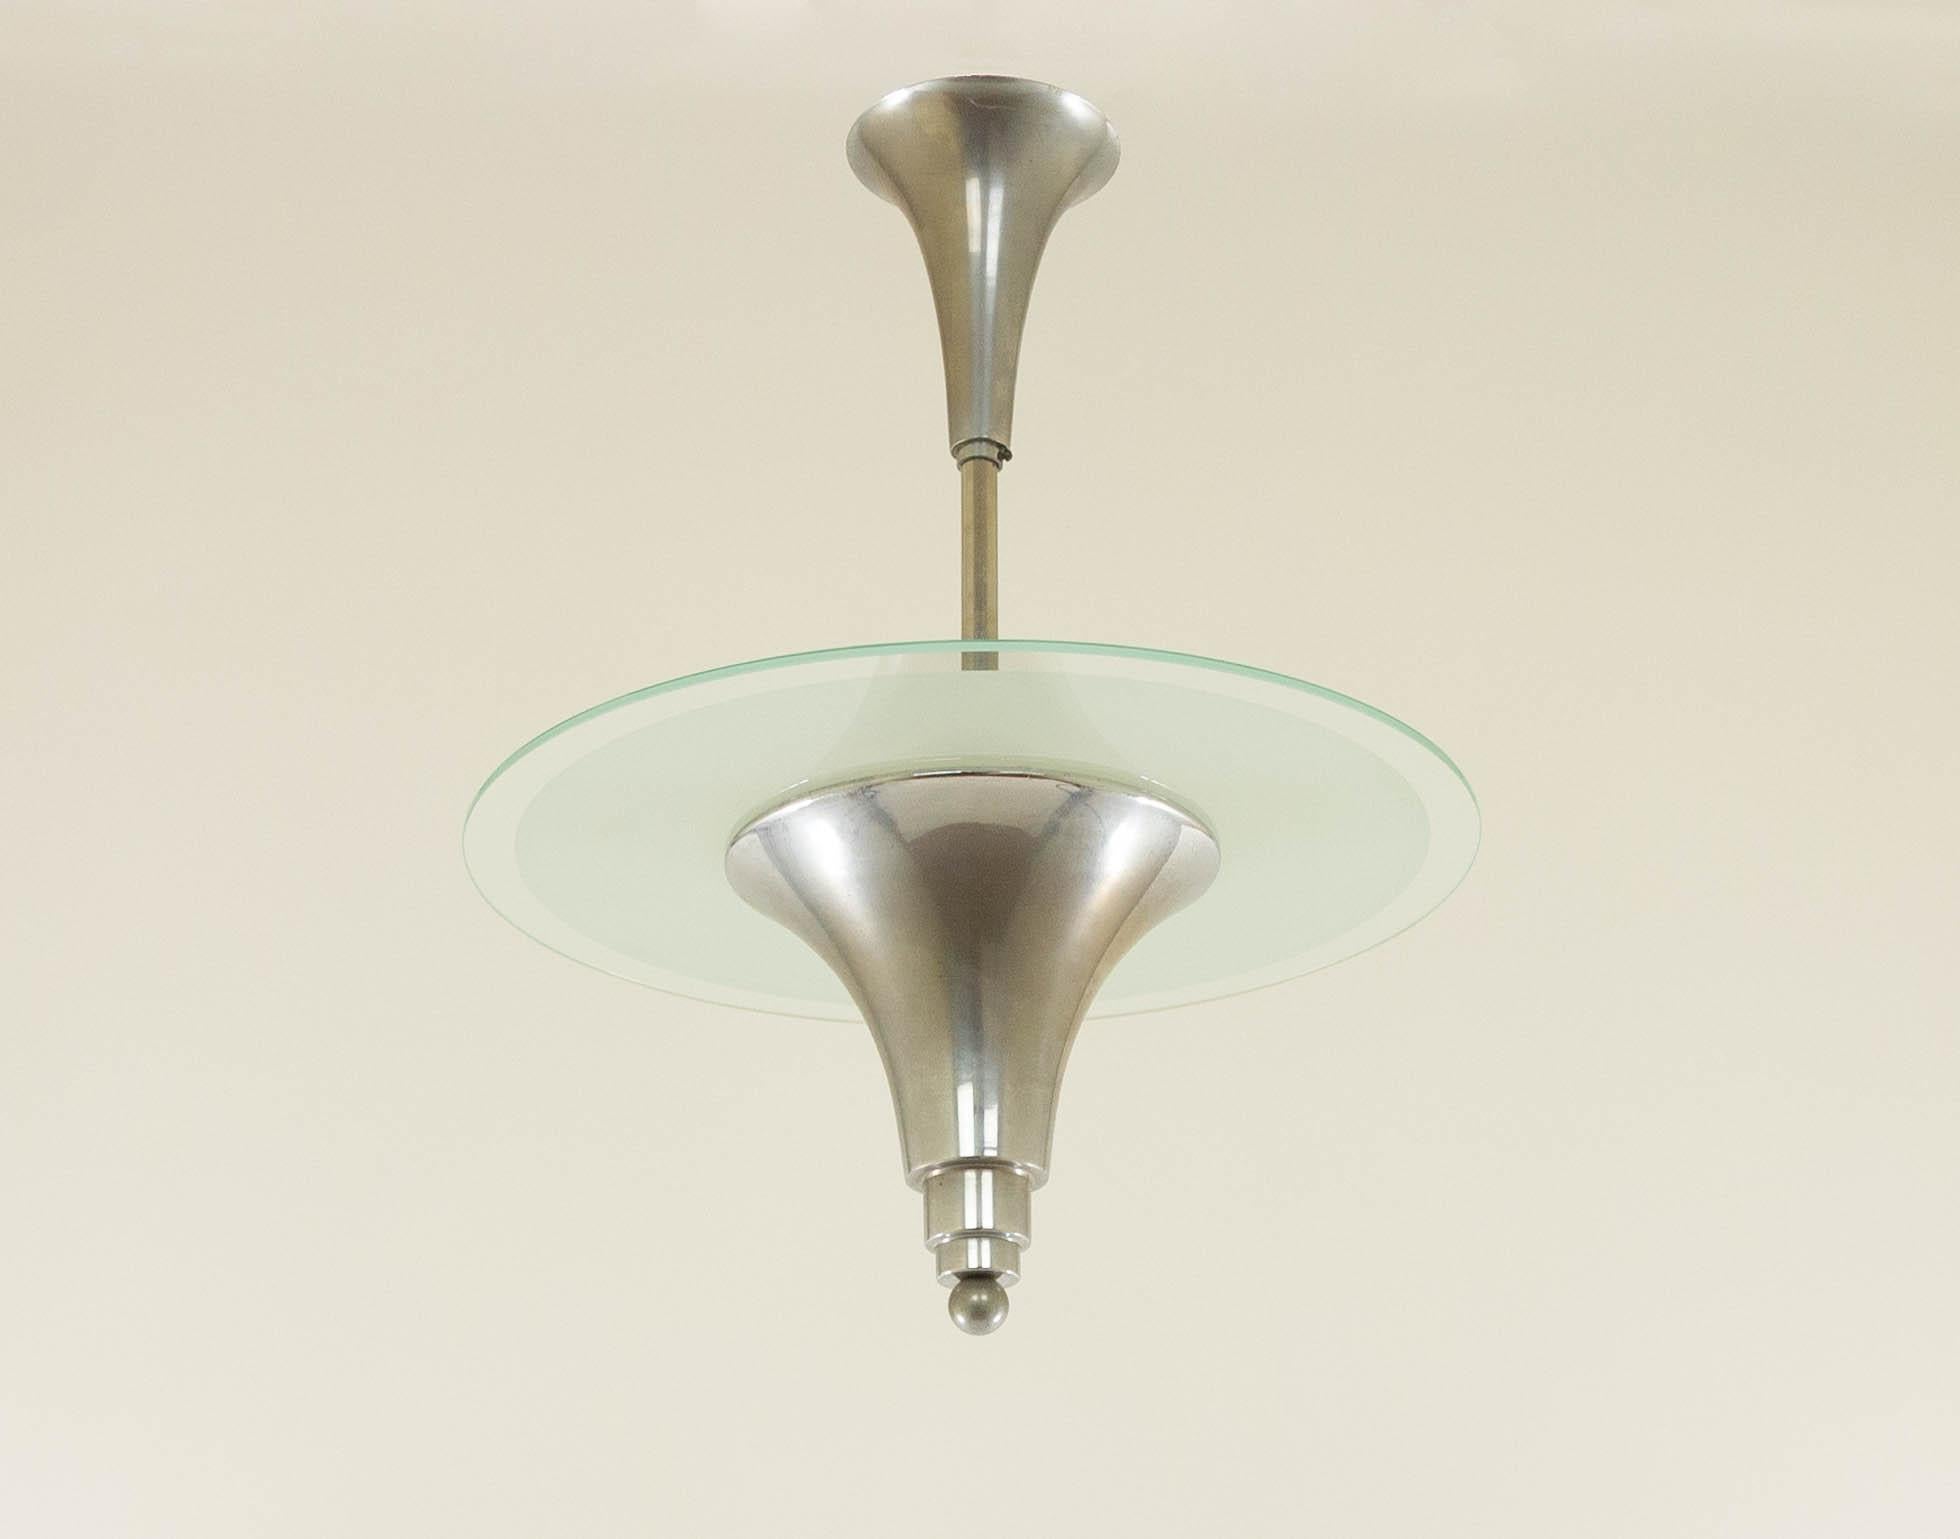 Characteristic Art Deco pendant light made of nickel and frosted glass; designed and manufactured in France around the 1930s.

The lamp is in good vintage condition. The inner circle of the glass plate - which is not visible because it lies on the